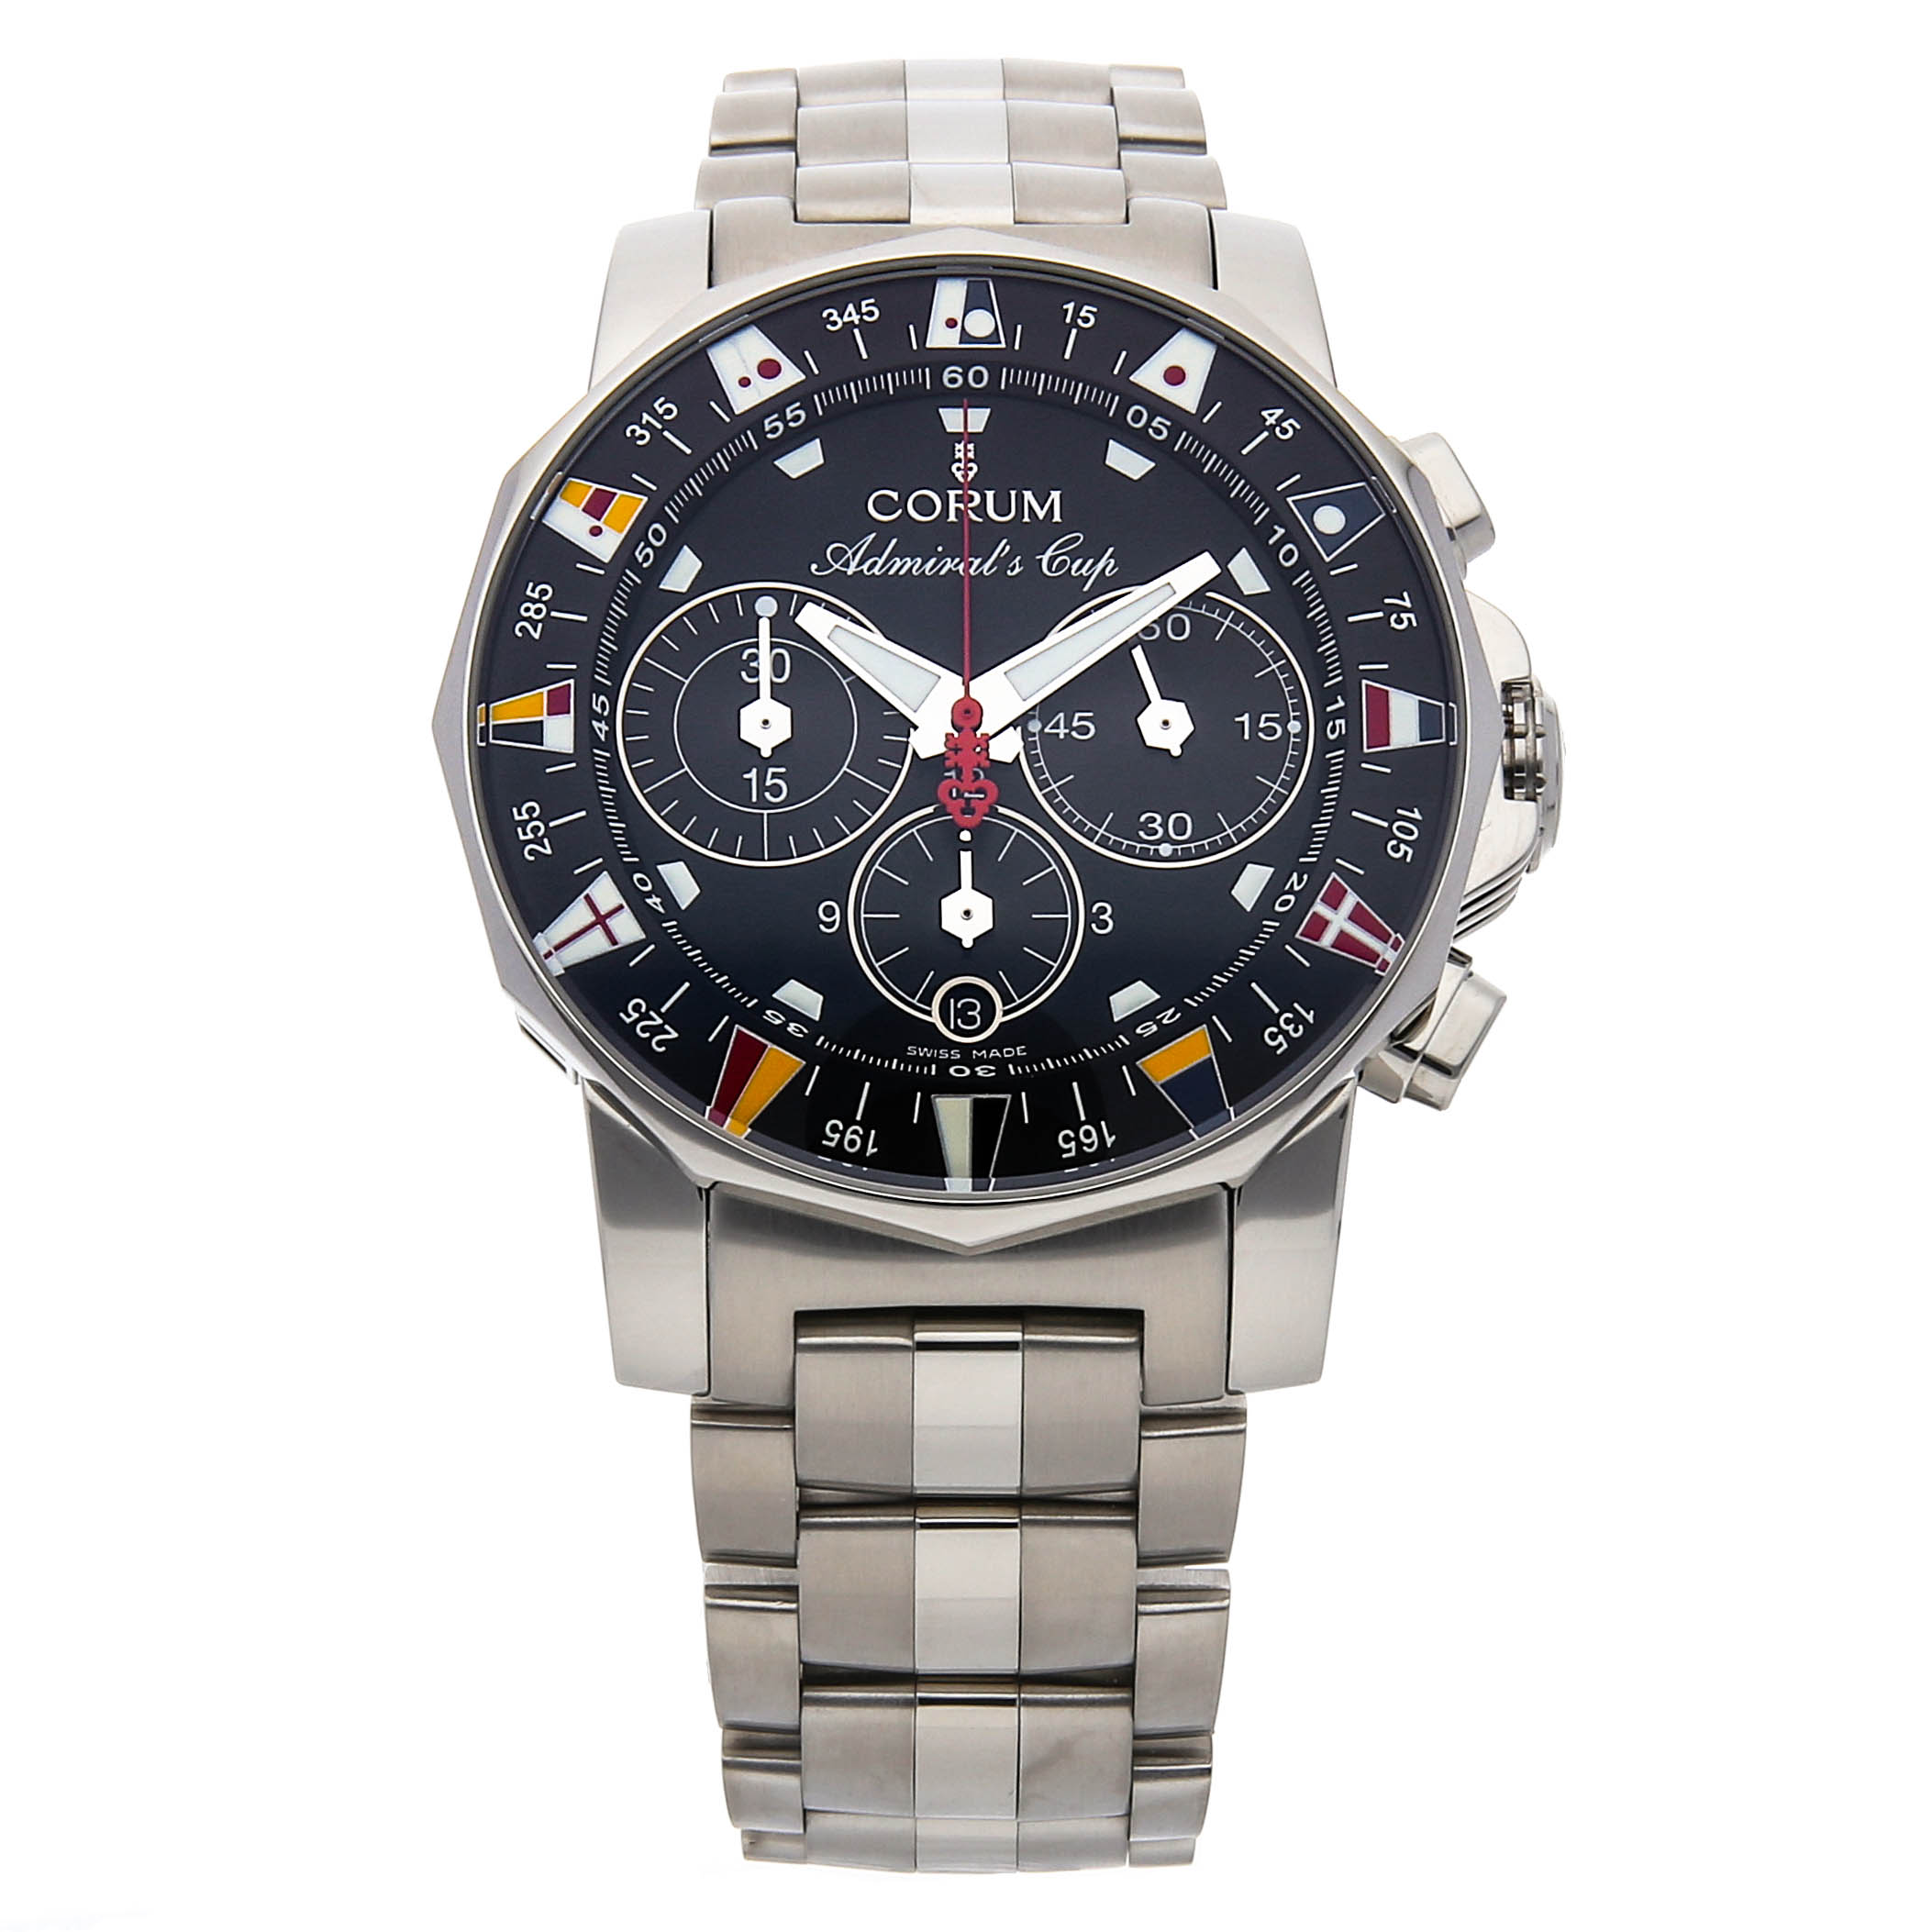 Admiral's Cup 44 Chronograph in Steel on Steel Bracelet with Blue Dial